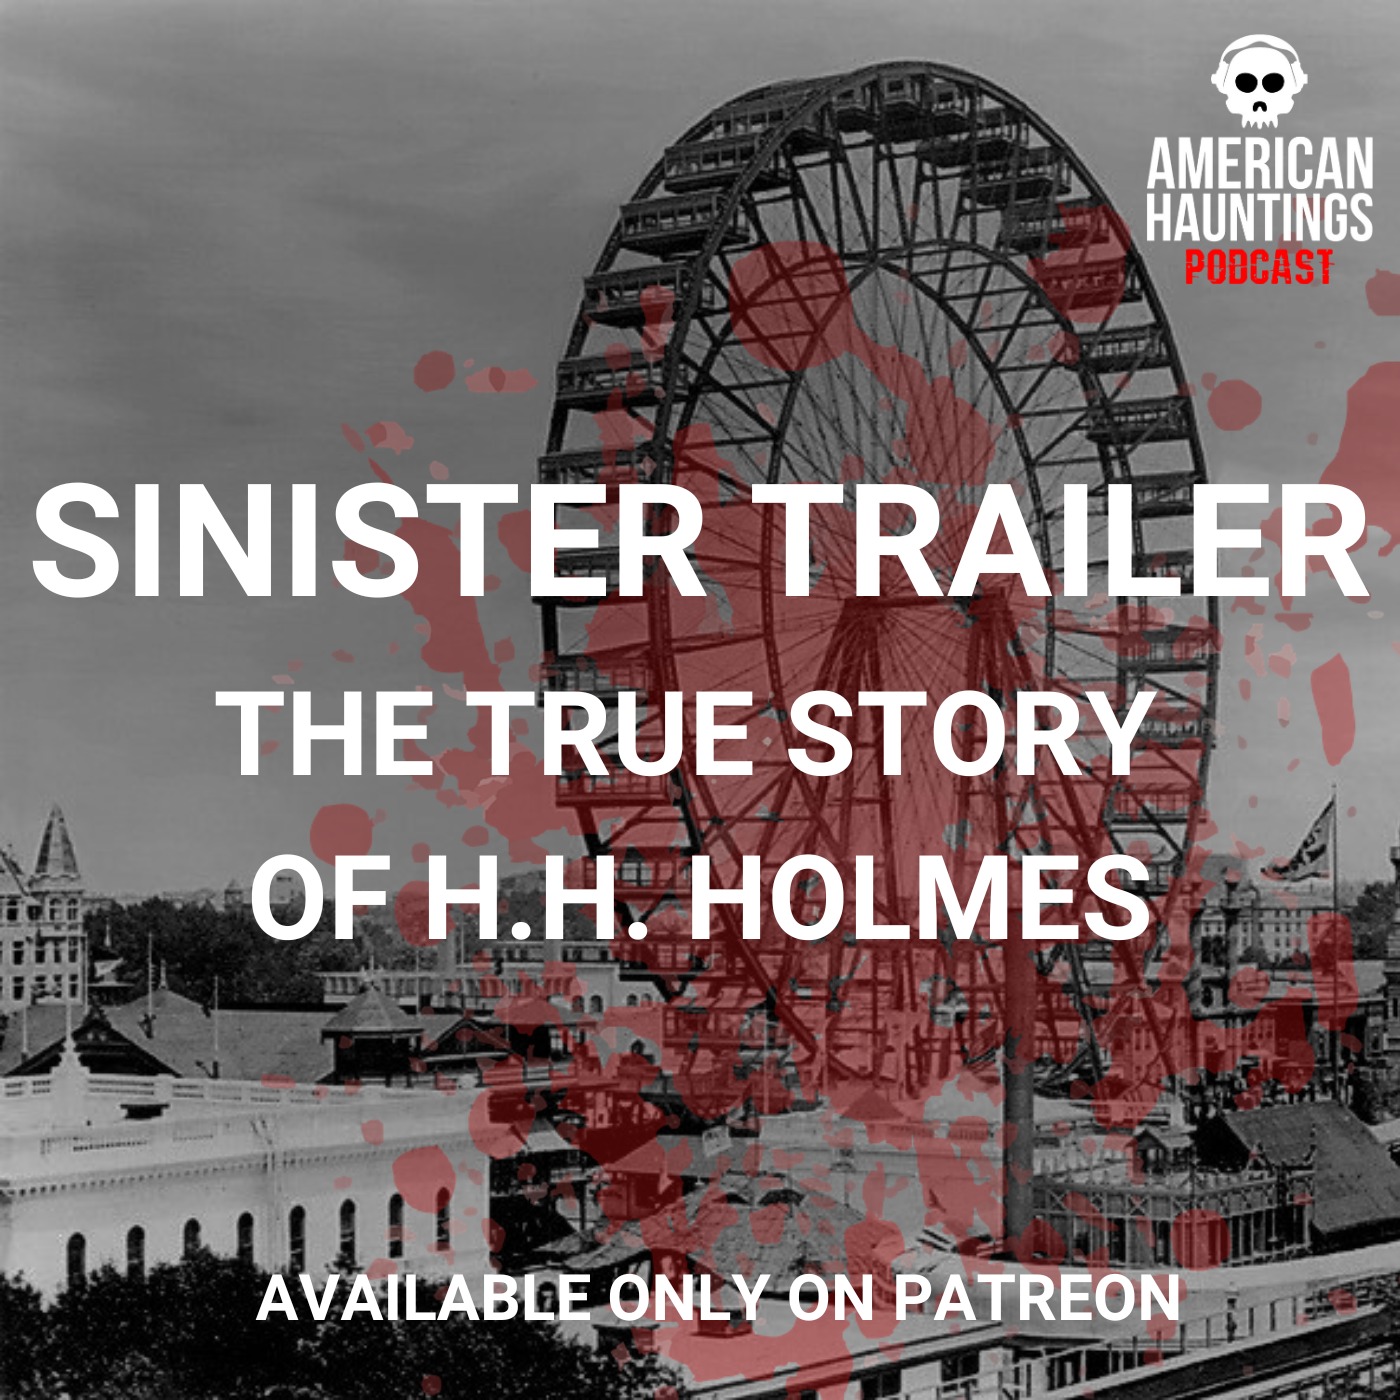 Sinister Trailer: The True Story Of H.H. Holmes